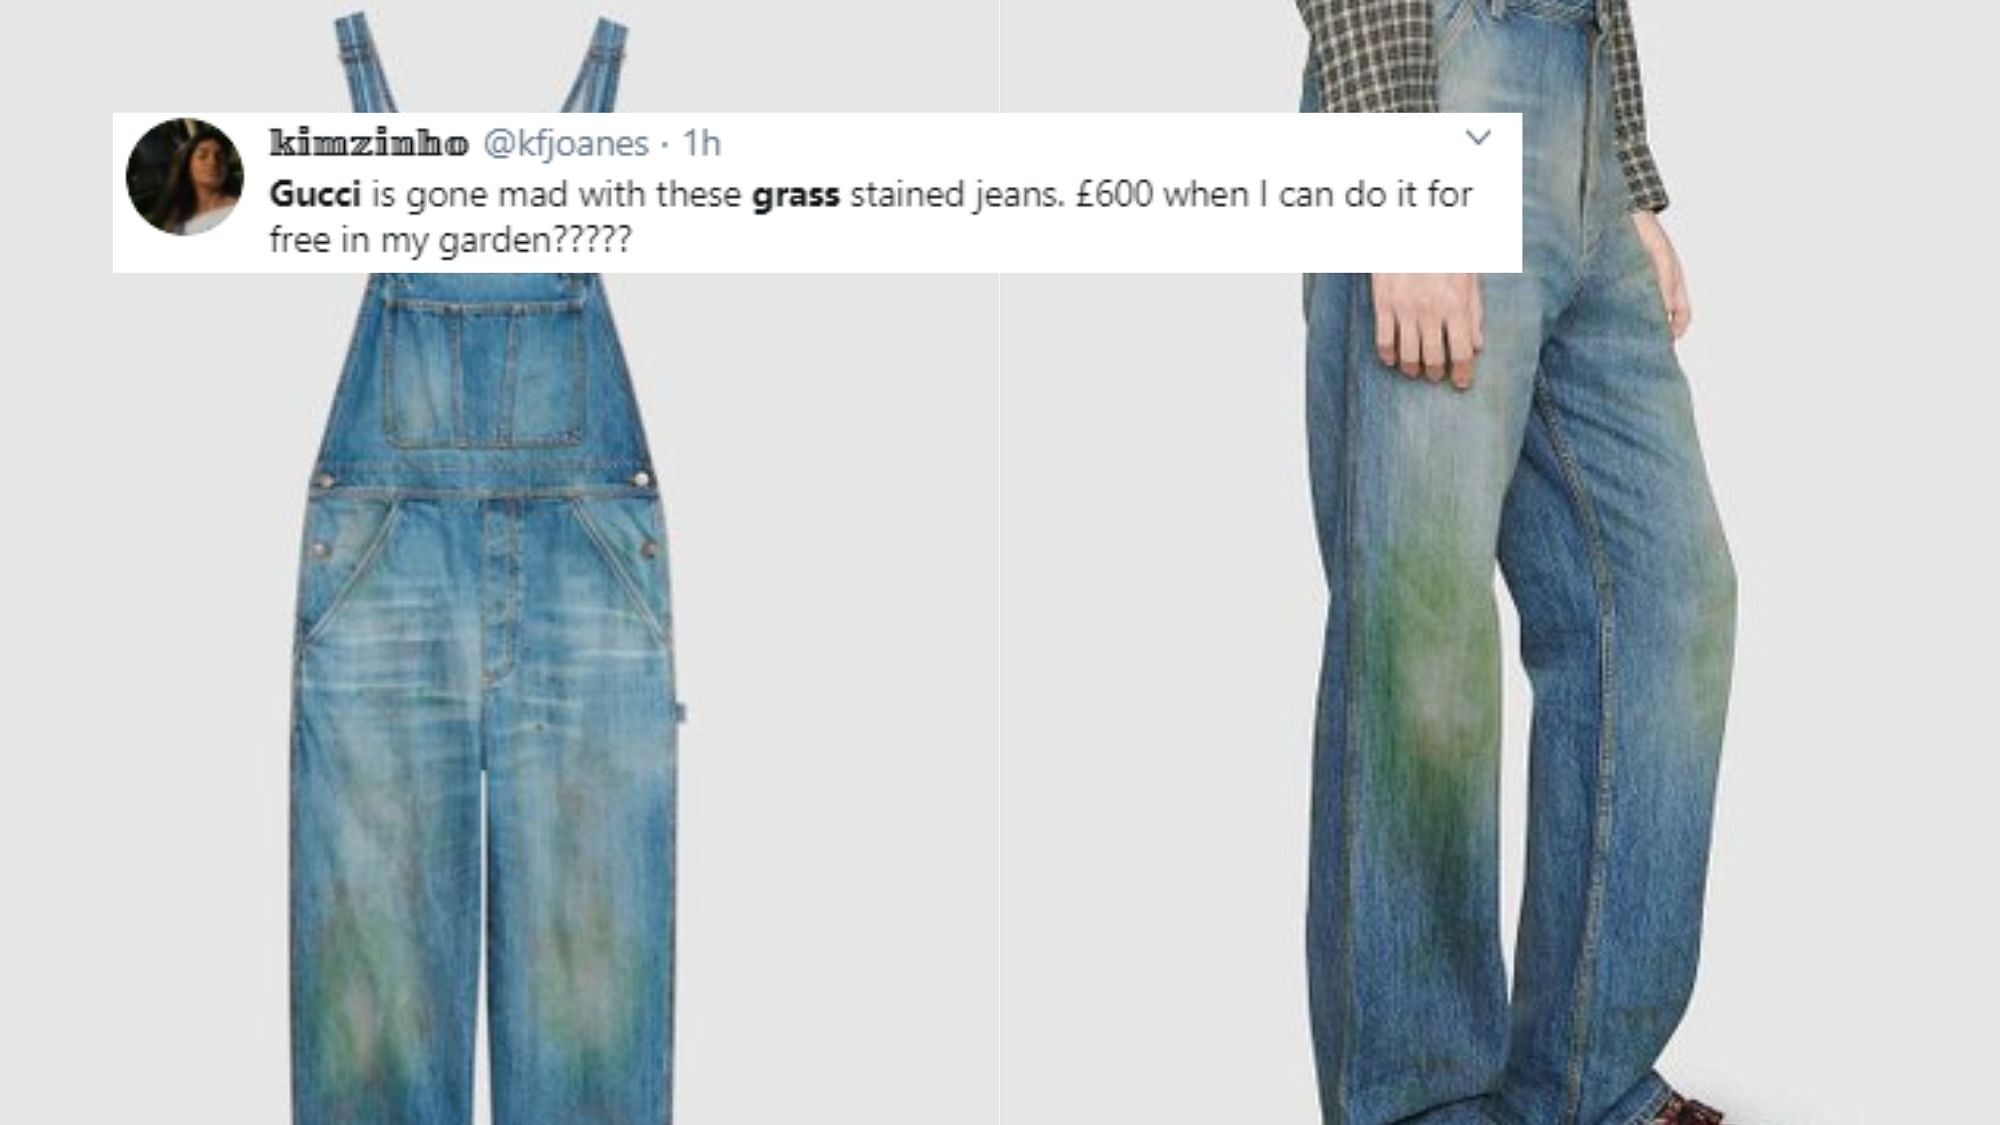 Gucci's 'Grass-Stained' Pants Cost Rs 88,000 & Twitter Is Shook